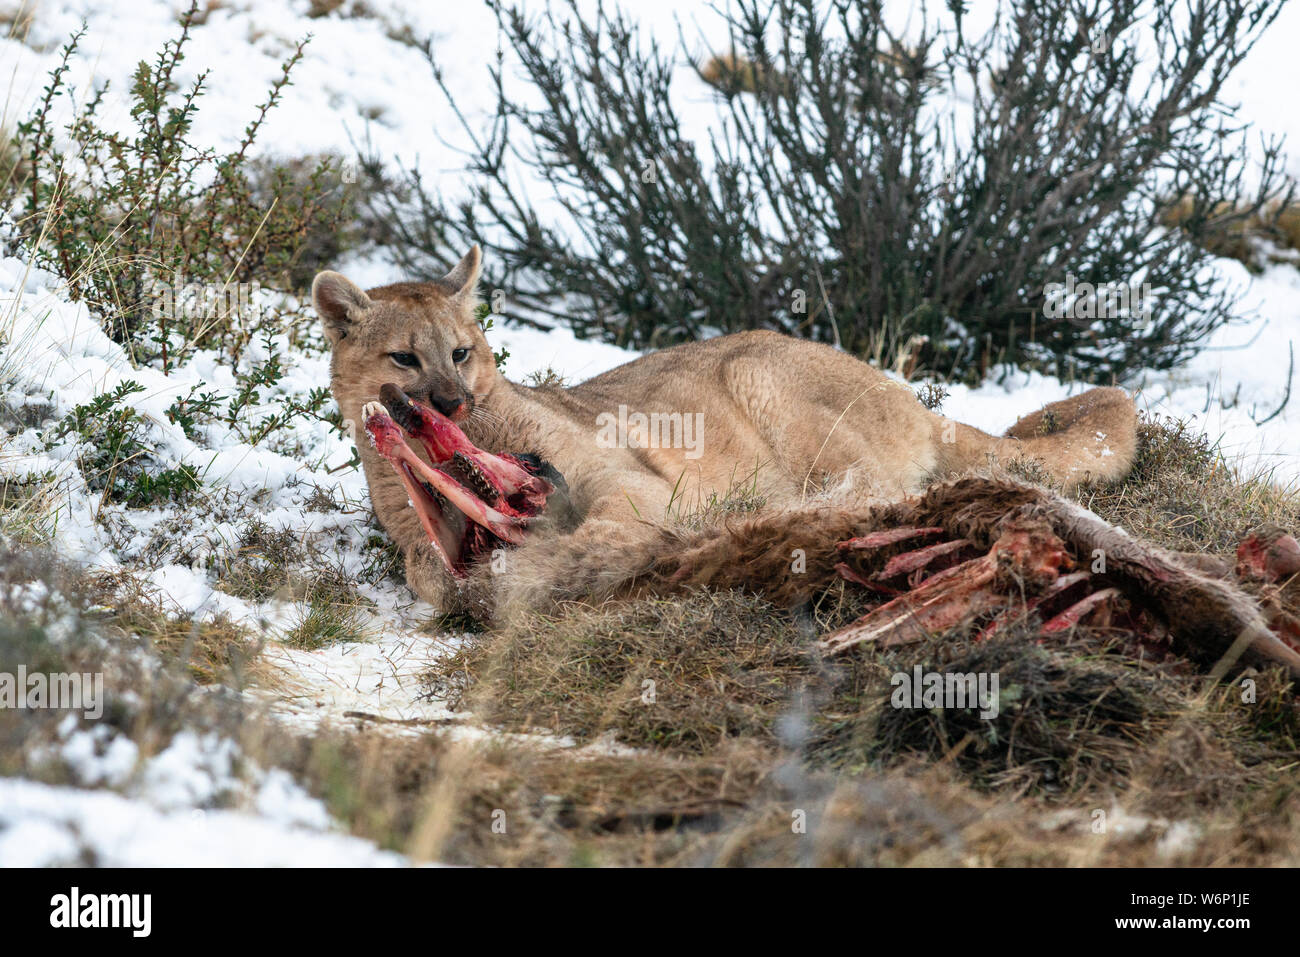 Puma cub eating a Guanaco in Torres del Paine National Park, Chile Stock Photo